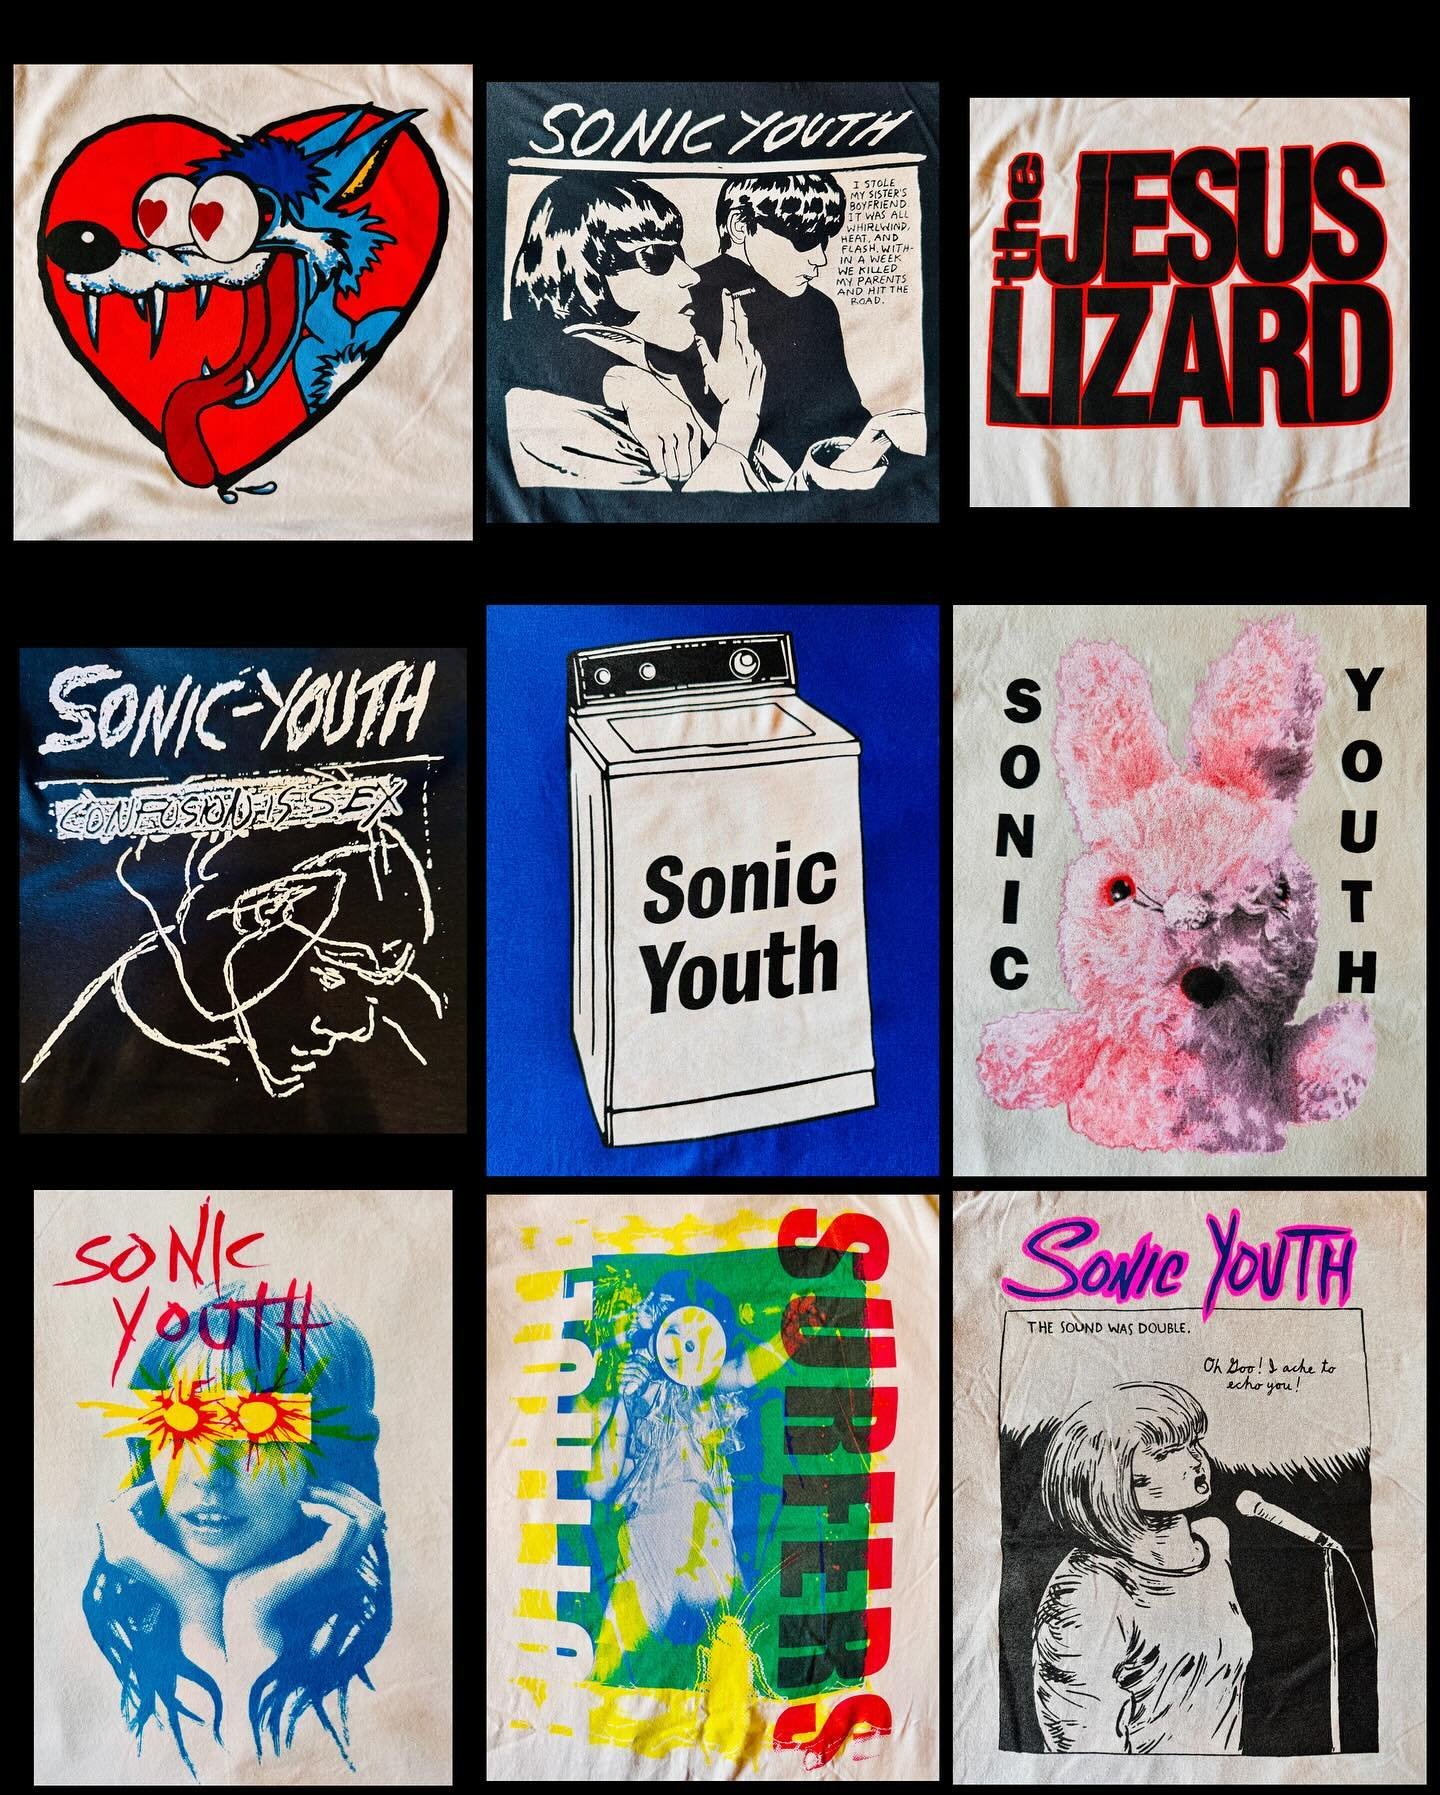 Lots of great new music tees out now! S-XL in most. A few 2Xs. $23 or $25 each (includes tax). 
#sonicyouth #buttholesurfers #dinosaurjr #pavement #bikinikill #yolatengo #thejesuslizard #tenaciousd